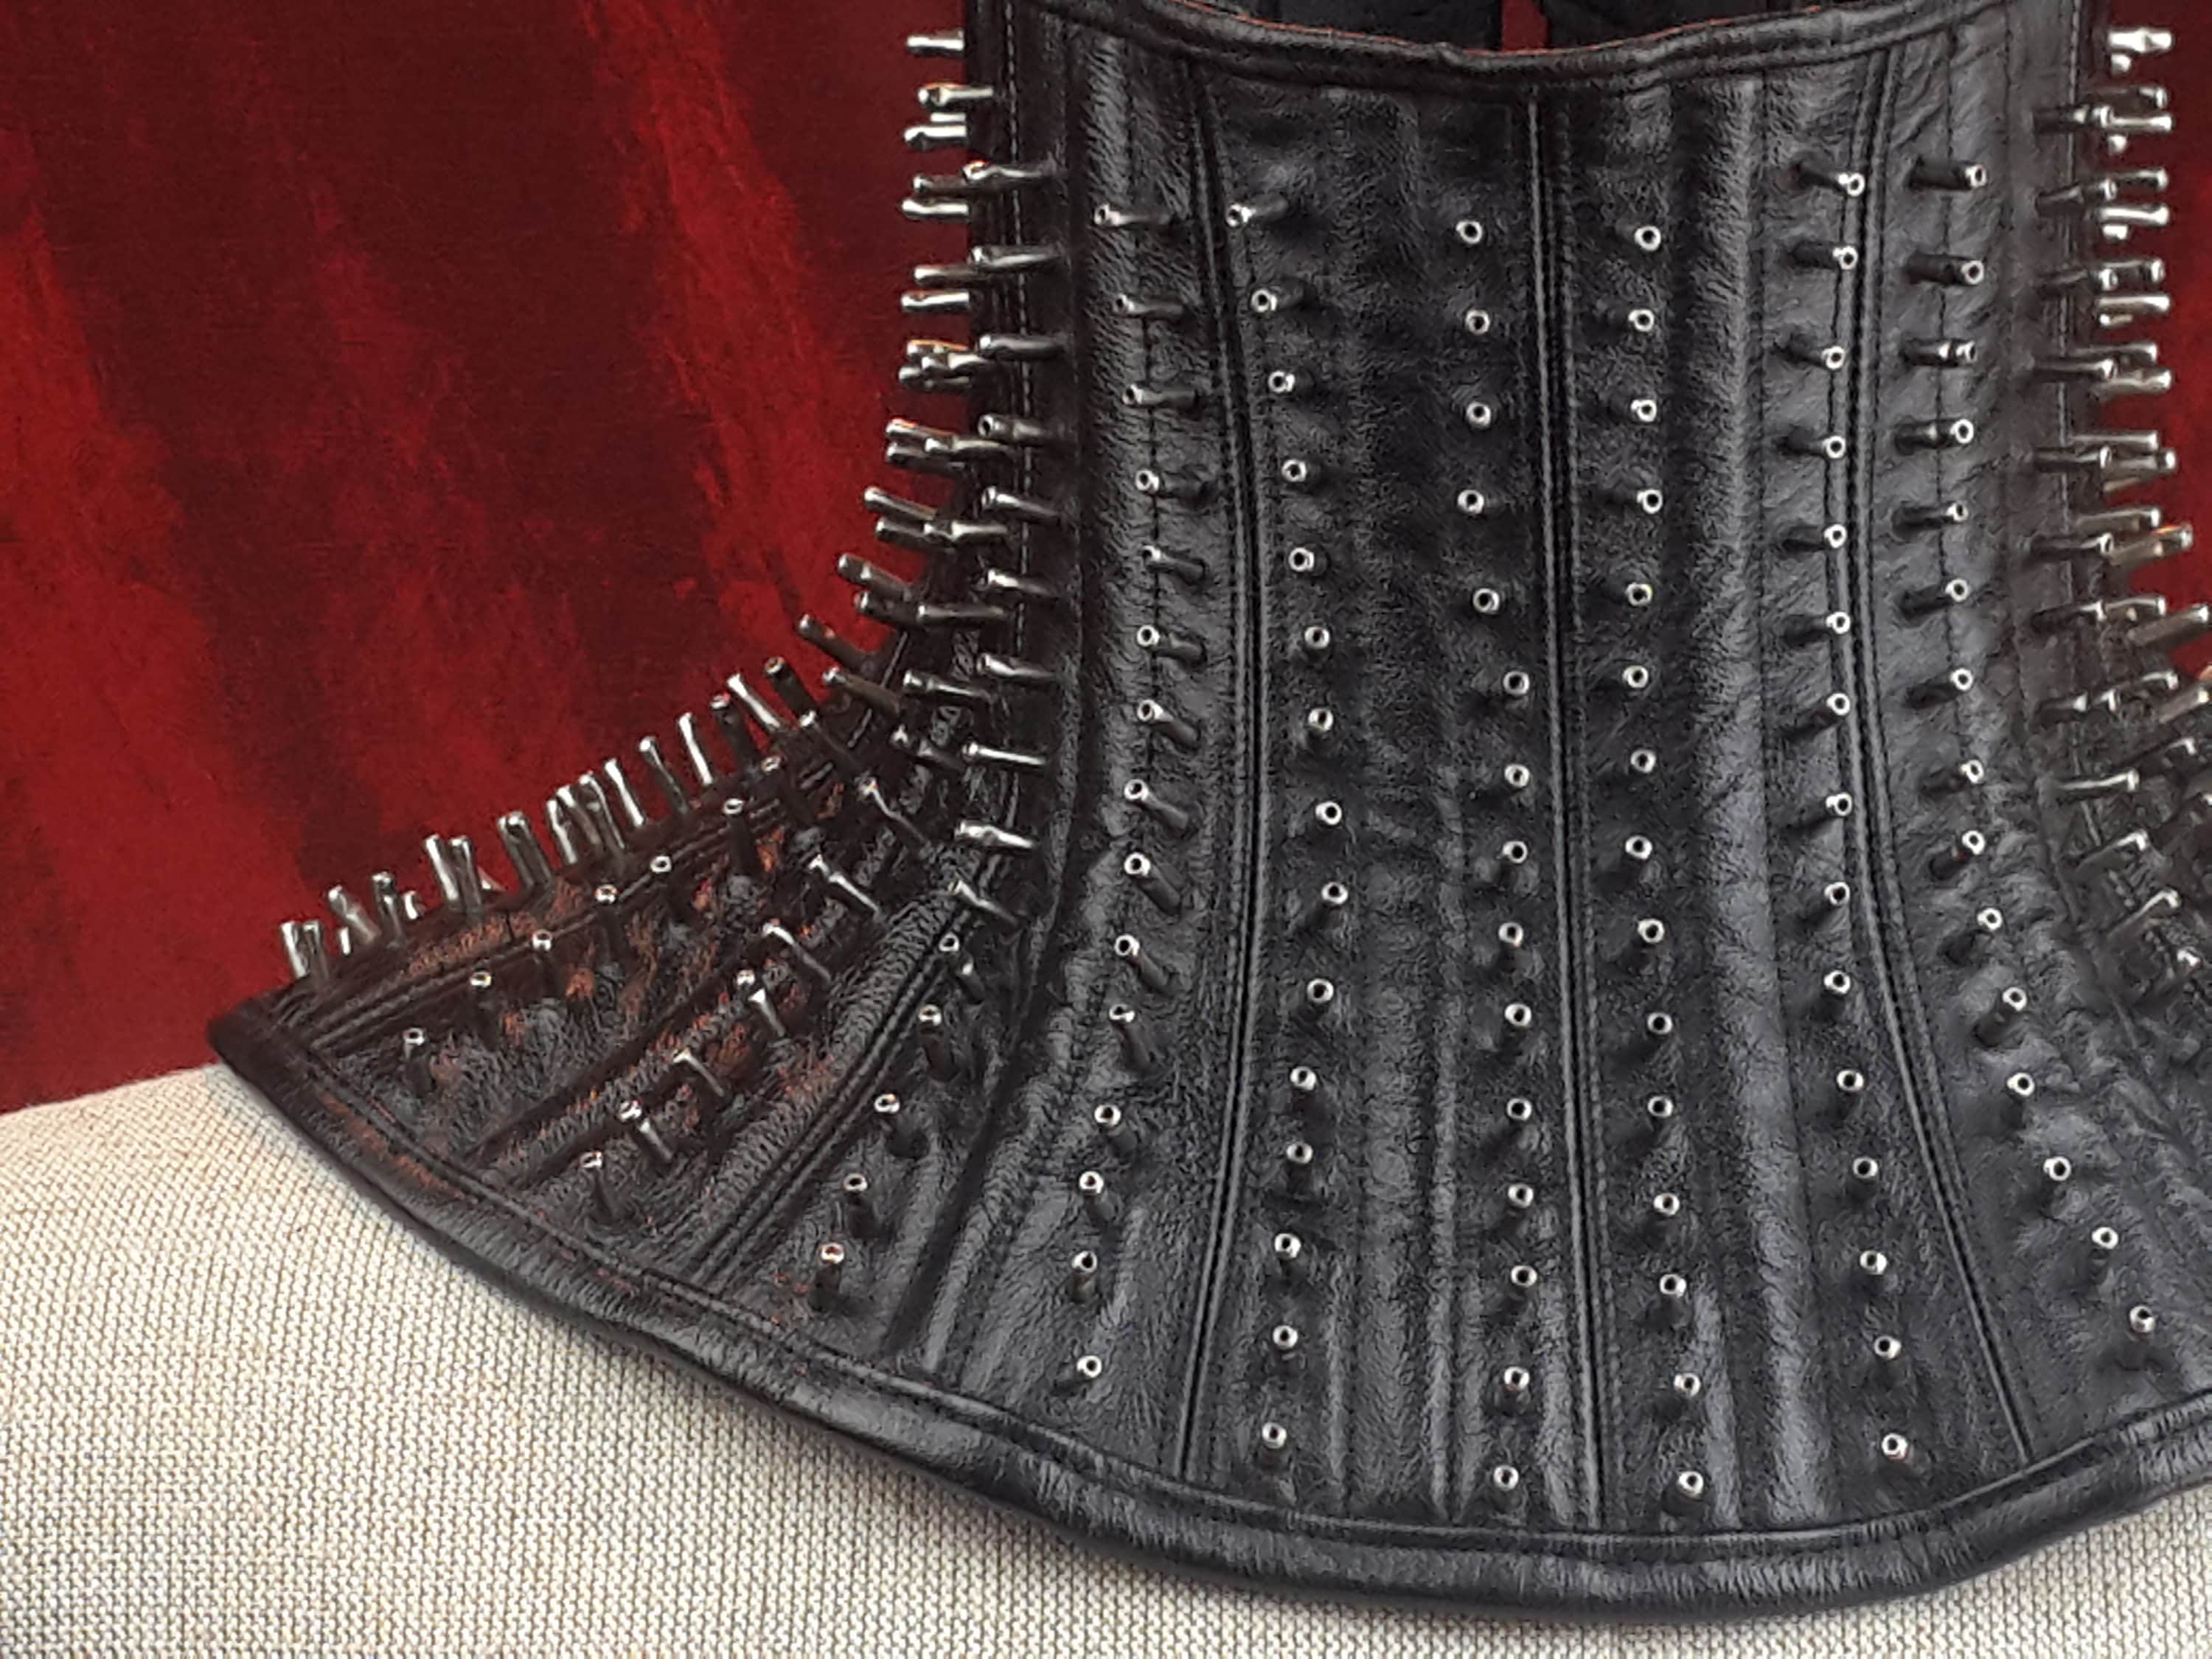 Hell Raiser Neck Corset With Spikes and Fully Boned Leather. -  Canada